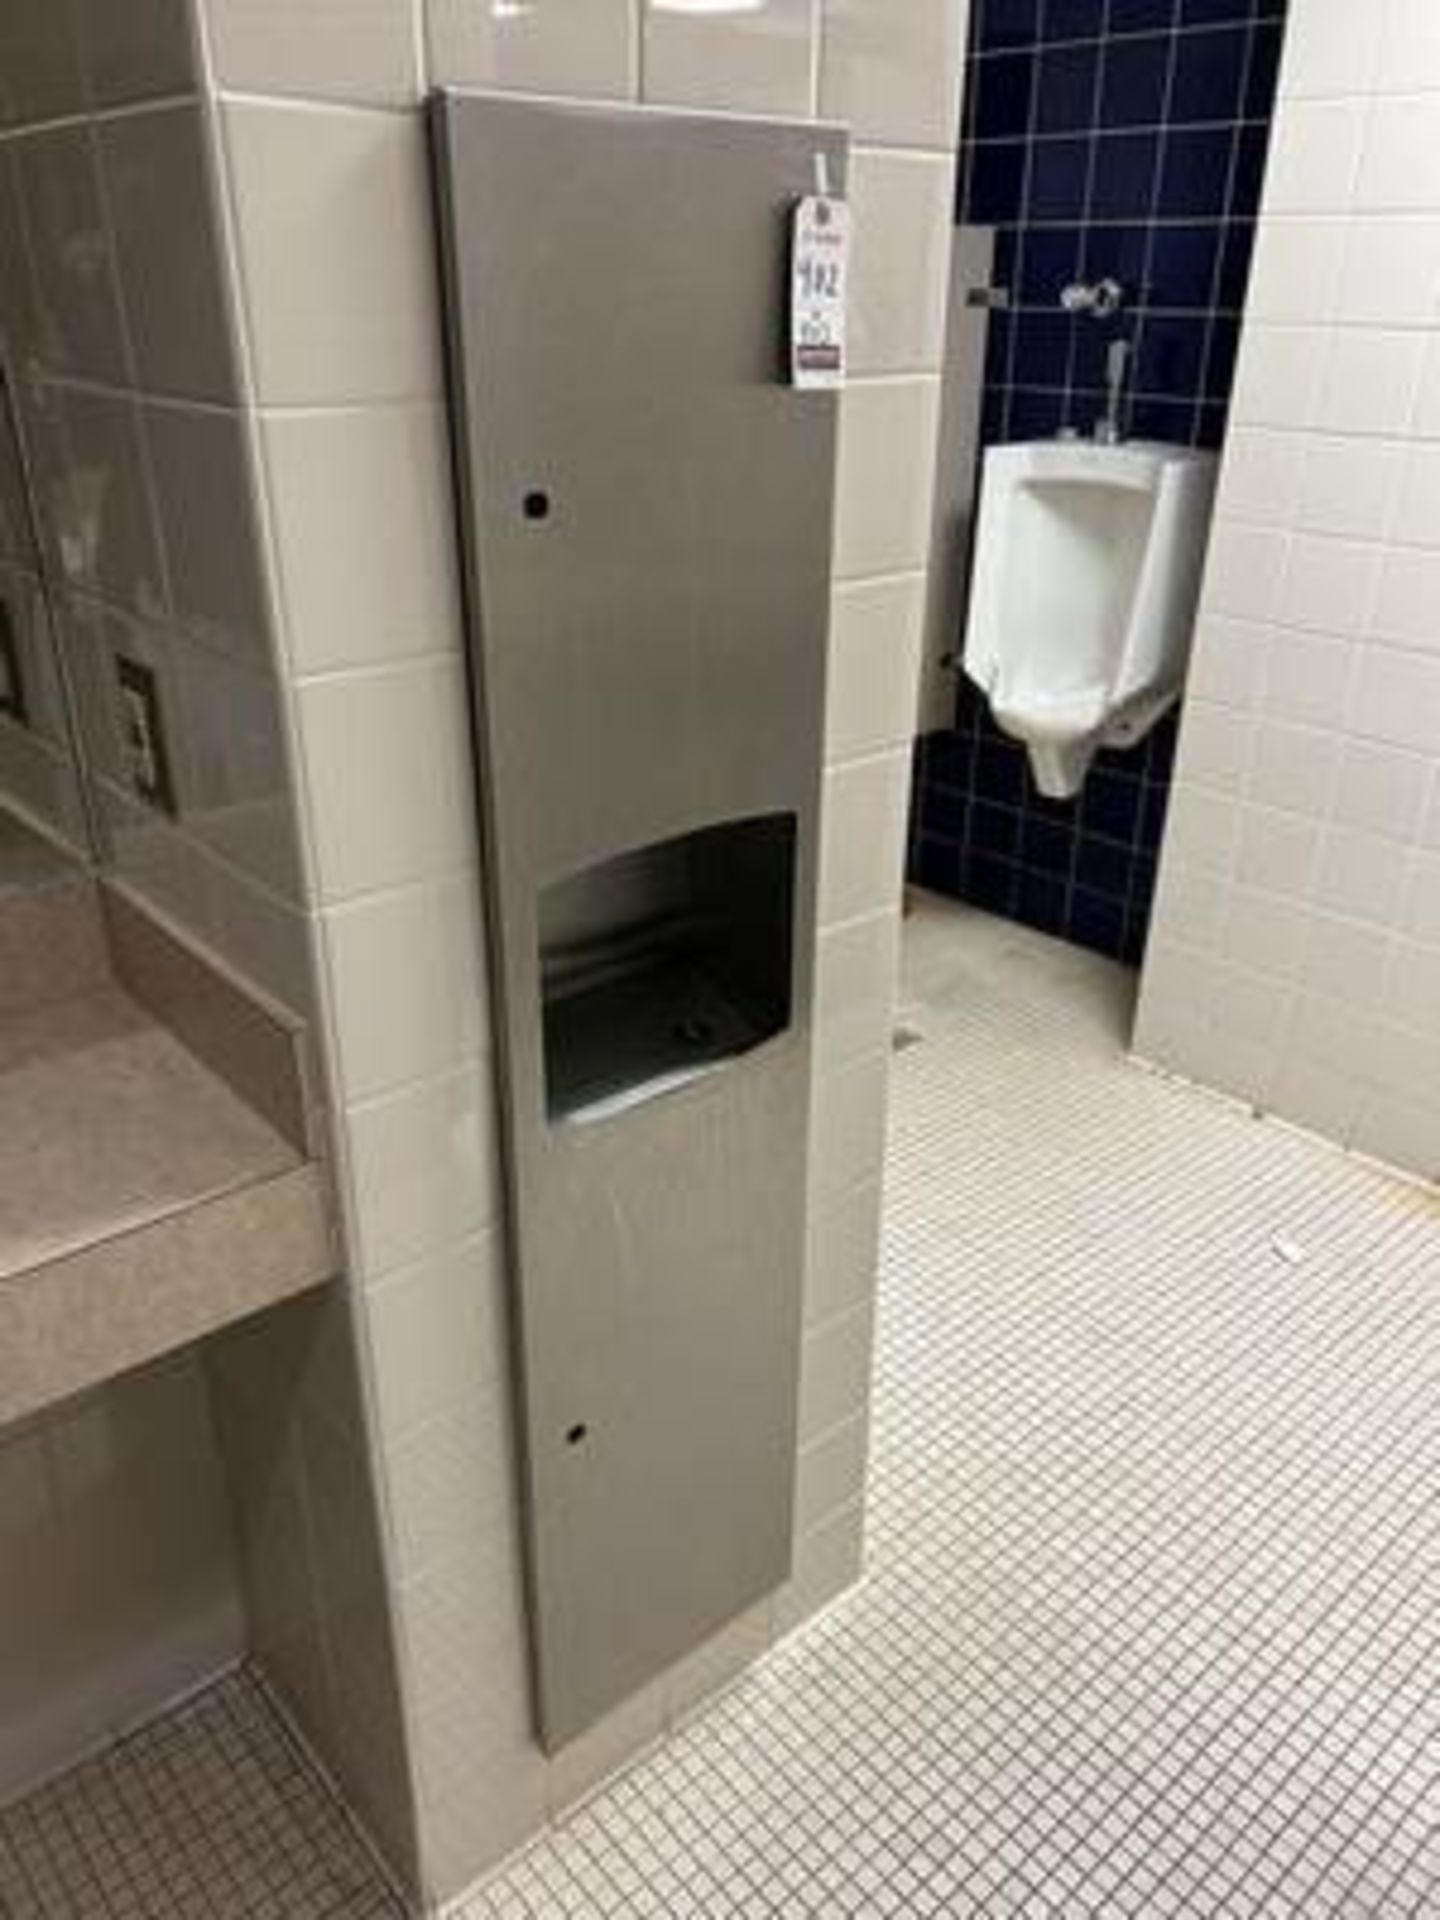 S.S PAPER TOWEL DISPENSER UNITS, WALL TYPE